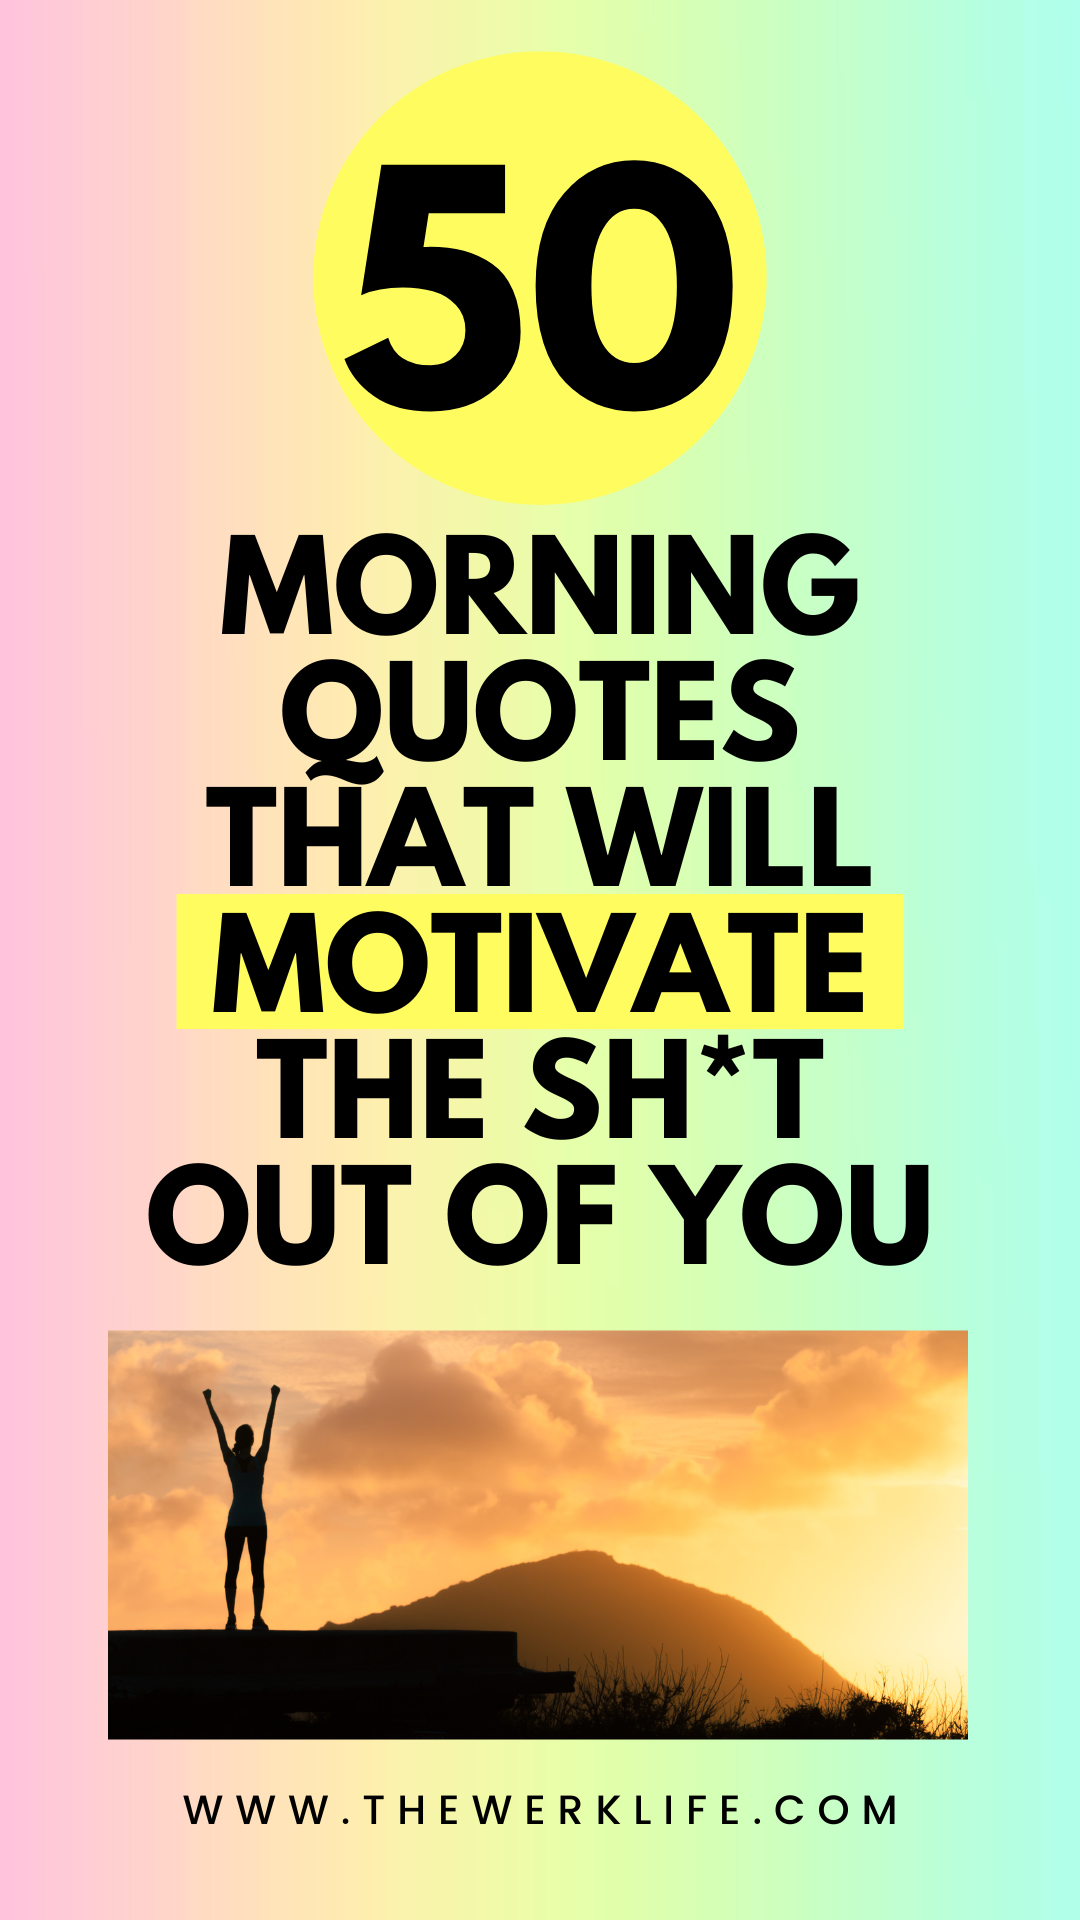 50 positive good morning quotes to start the day right